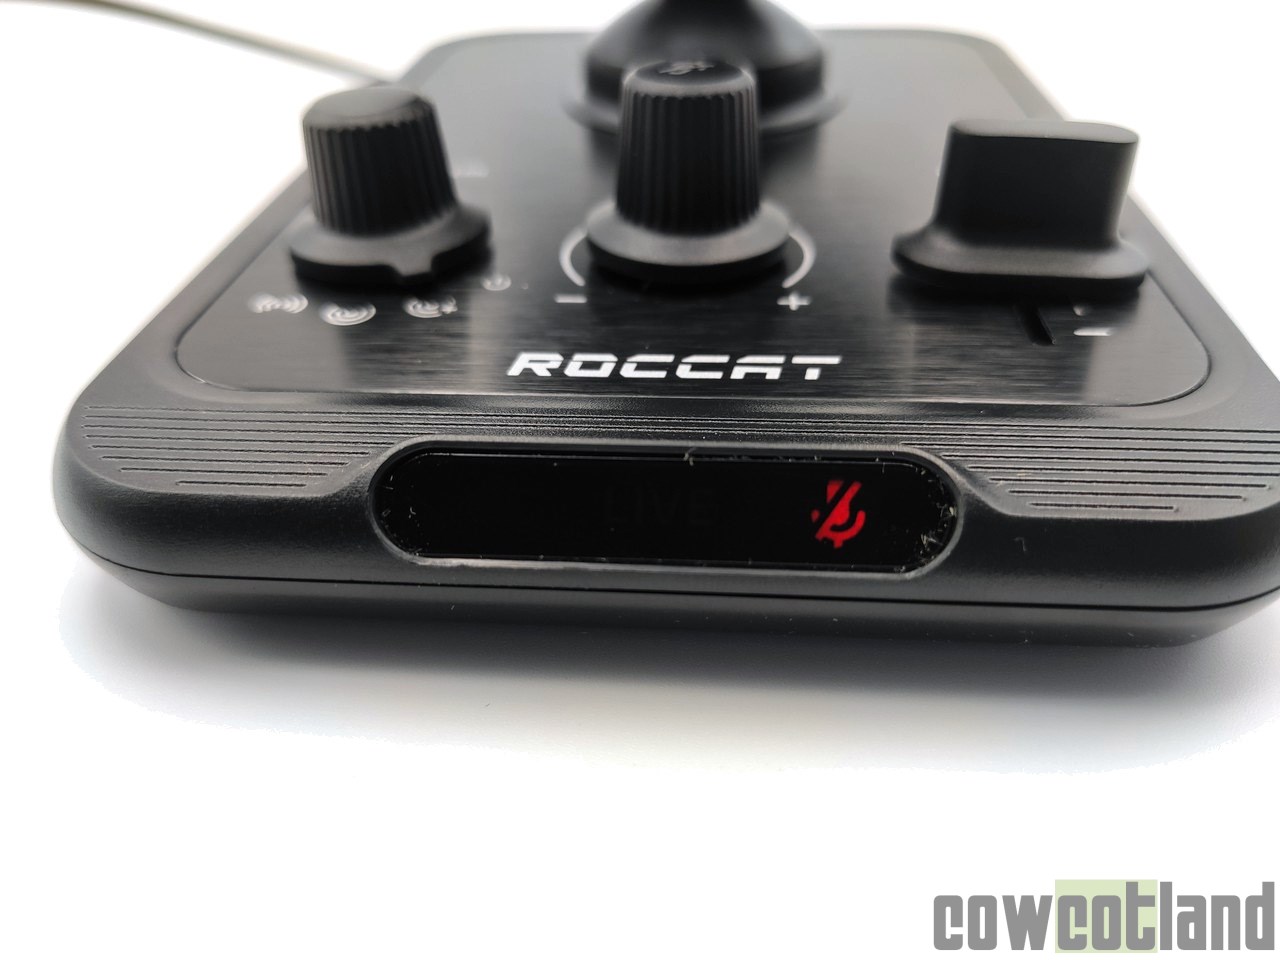 Image 45873, galerie Test micro ROCCAT Torch : ROCCAT se lance dans le micro gaming et streaming 